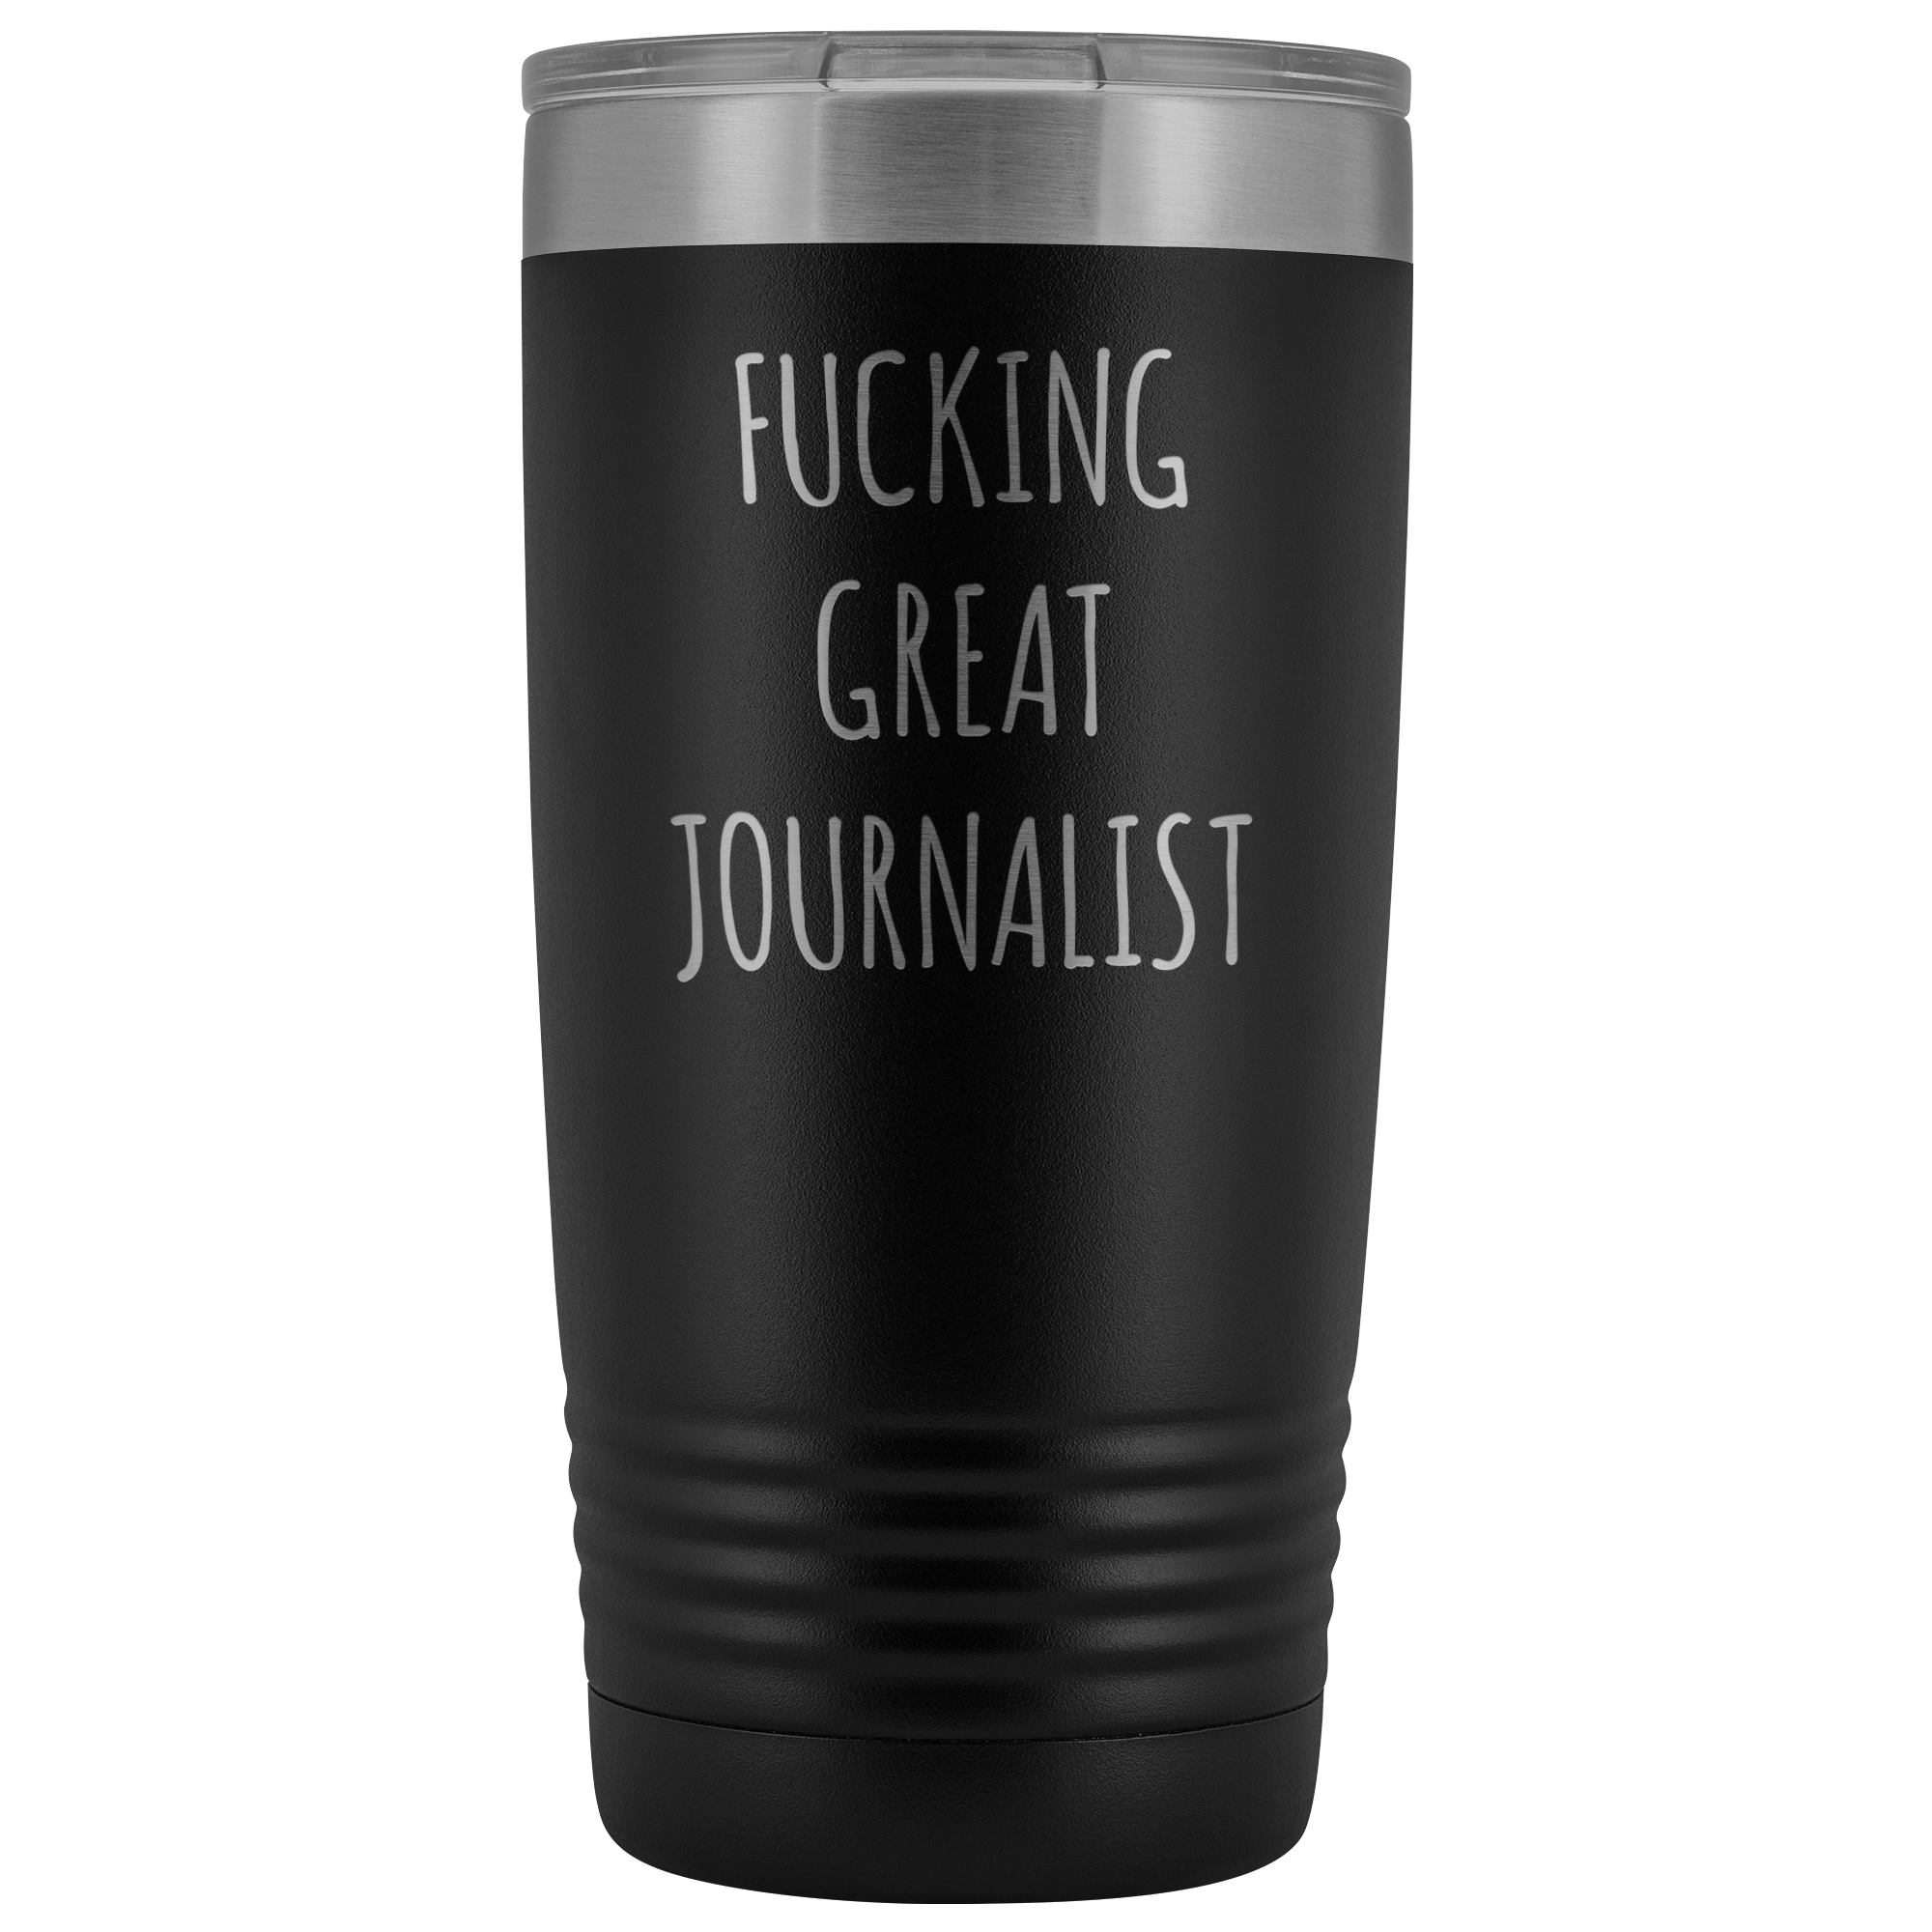 Journalism Major Gifts Great Journalist Tumbler Funny Mug Insulated Hot Cold Travel Coffee Cup 20oz BPA Free